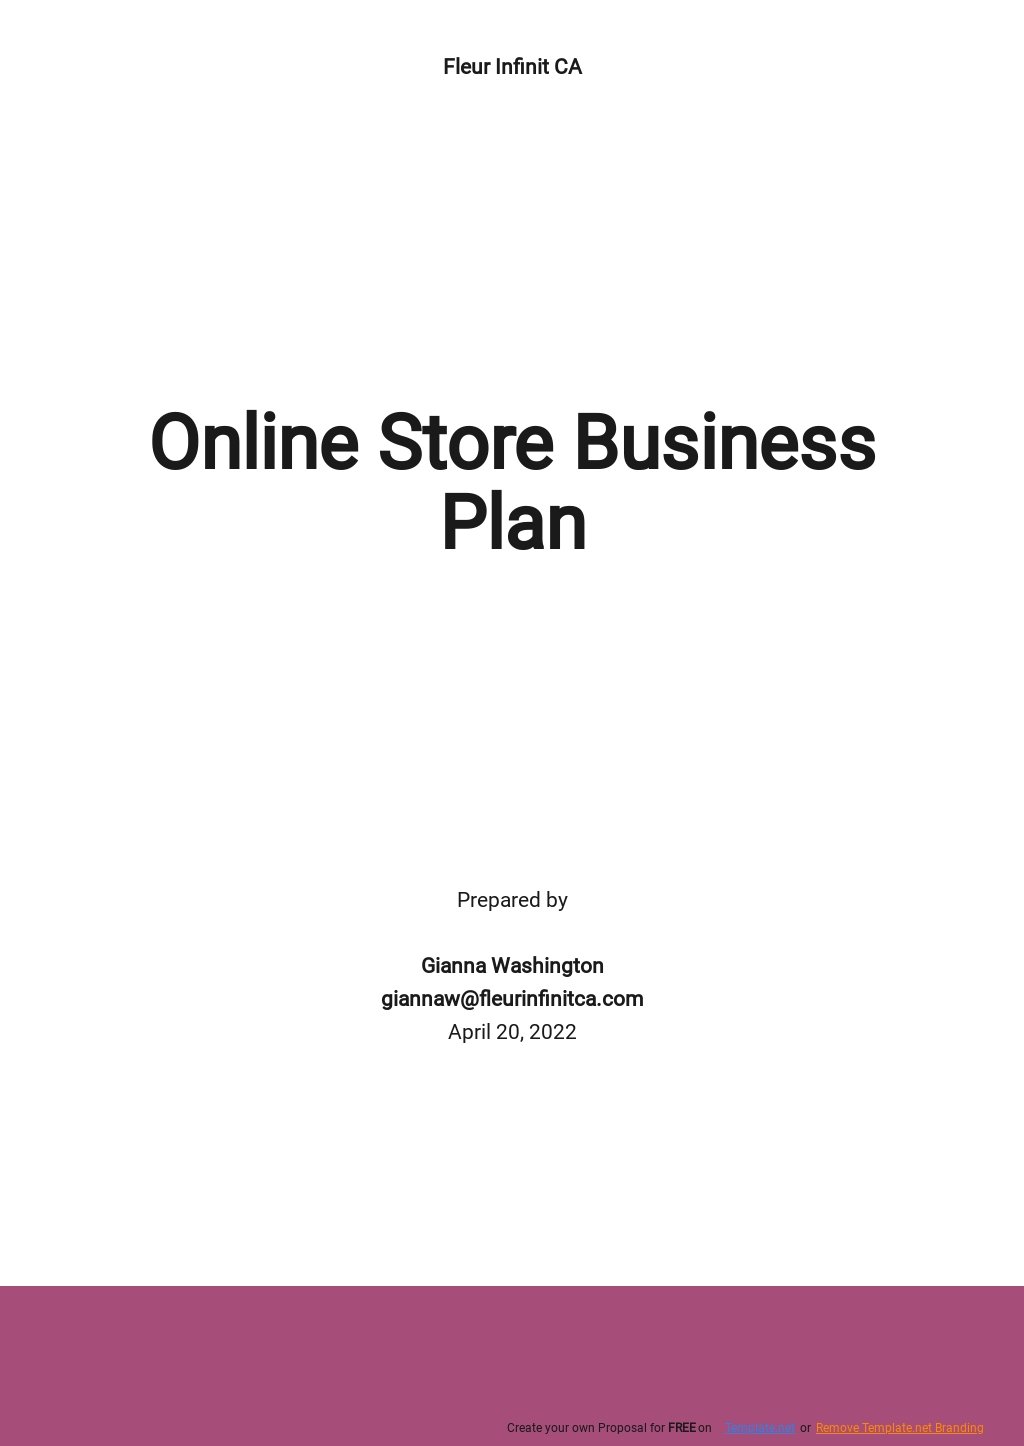 business plan for a stationery business